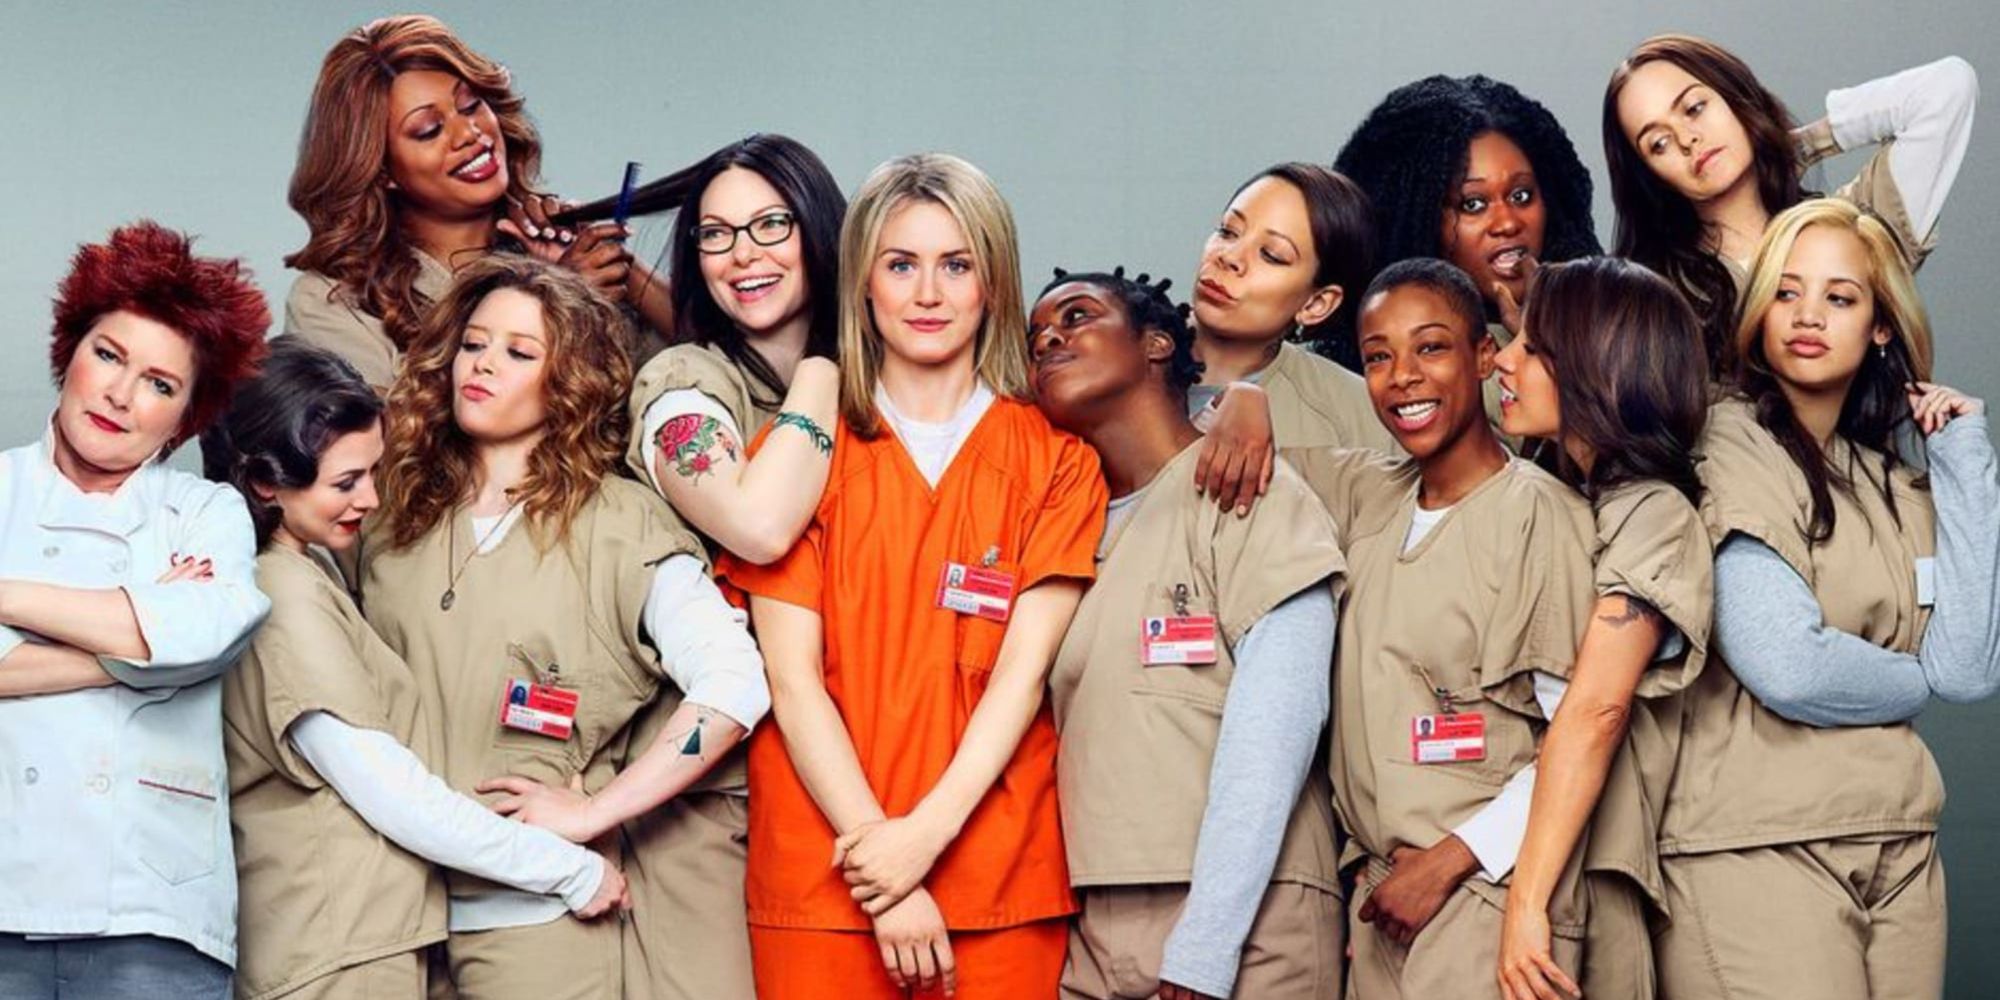 The cast of Orange Is The New Black posing for a group photo.